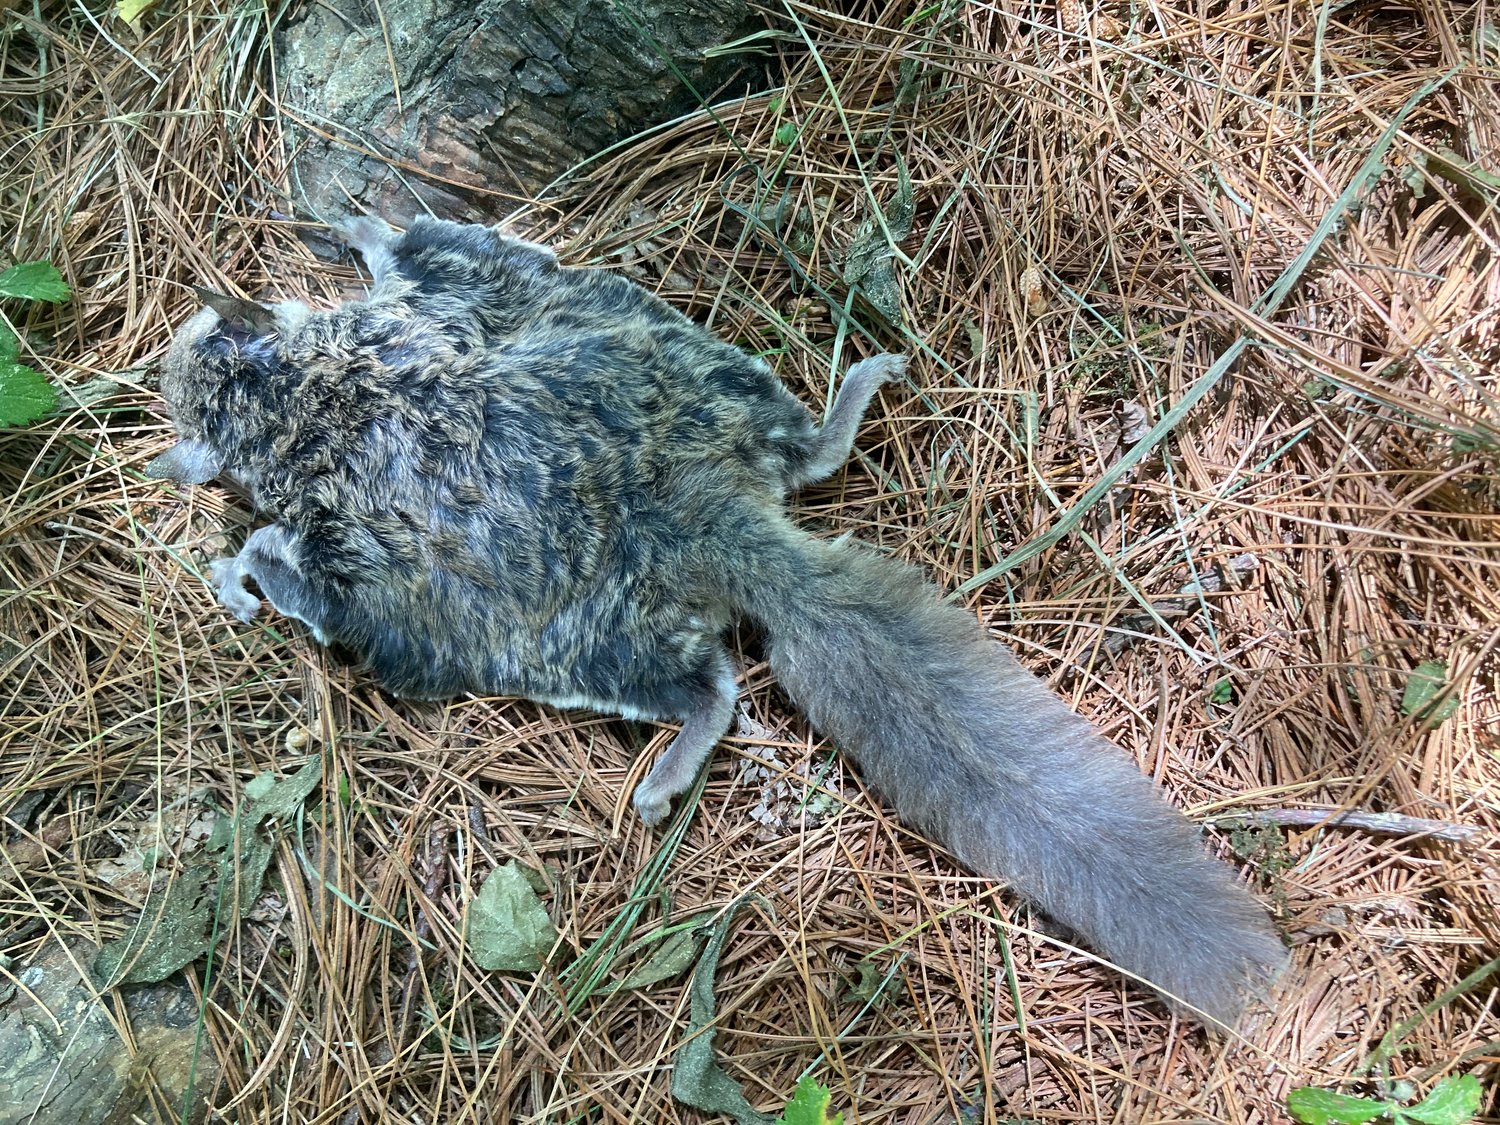 Flying squirrels are a nocturnal species. This one was found deceased, possibly the victim of a night predator. Typical predators include several species of owls and hawks, foxes, raccoons, weasels, bobcats, housecats and snakes.